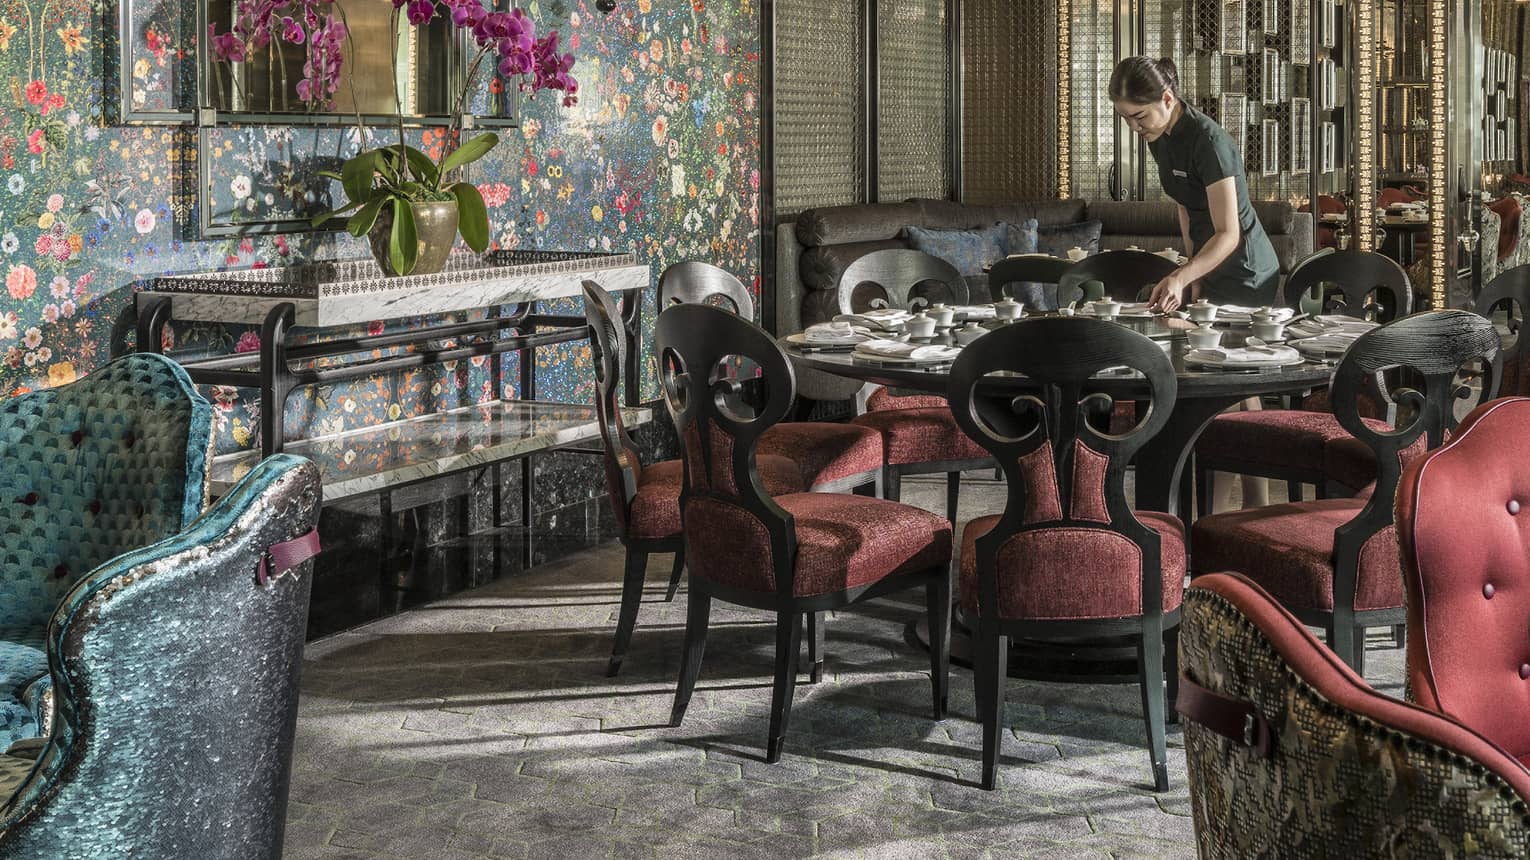 Hotel staff sets table with elegant red velvet chairs under tall mirror, floral wallpaper 